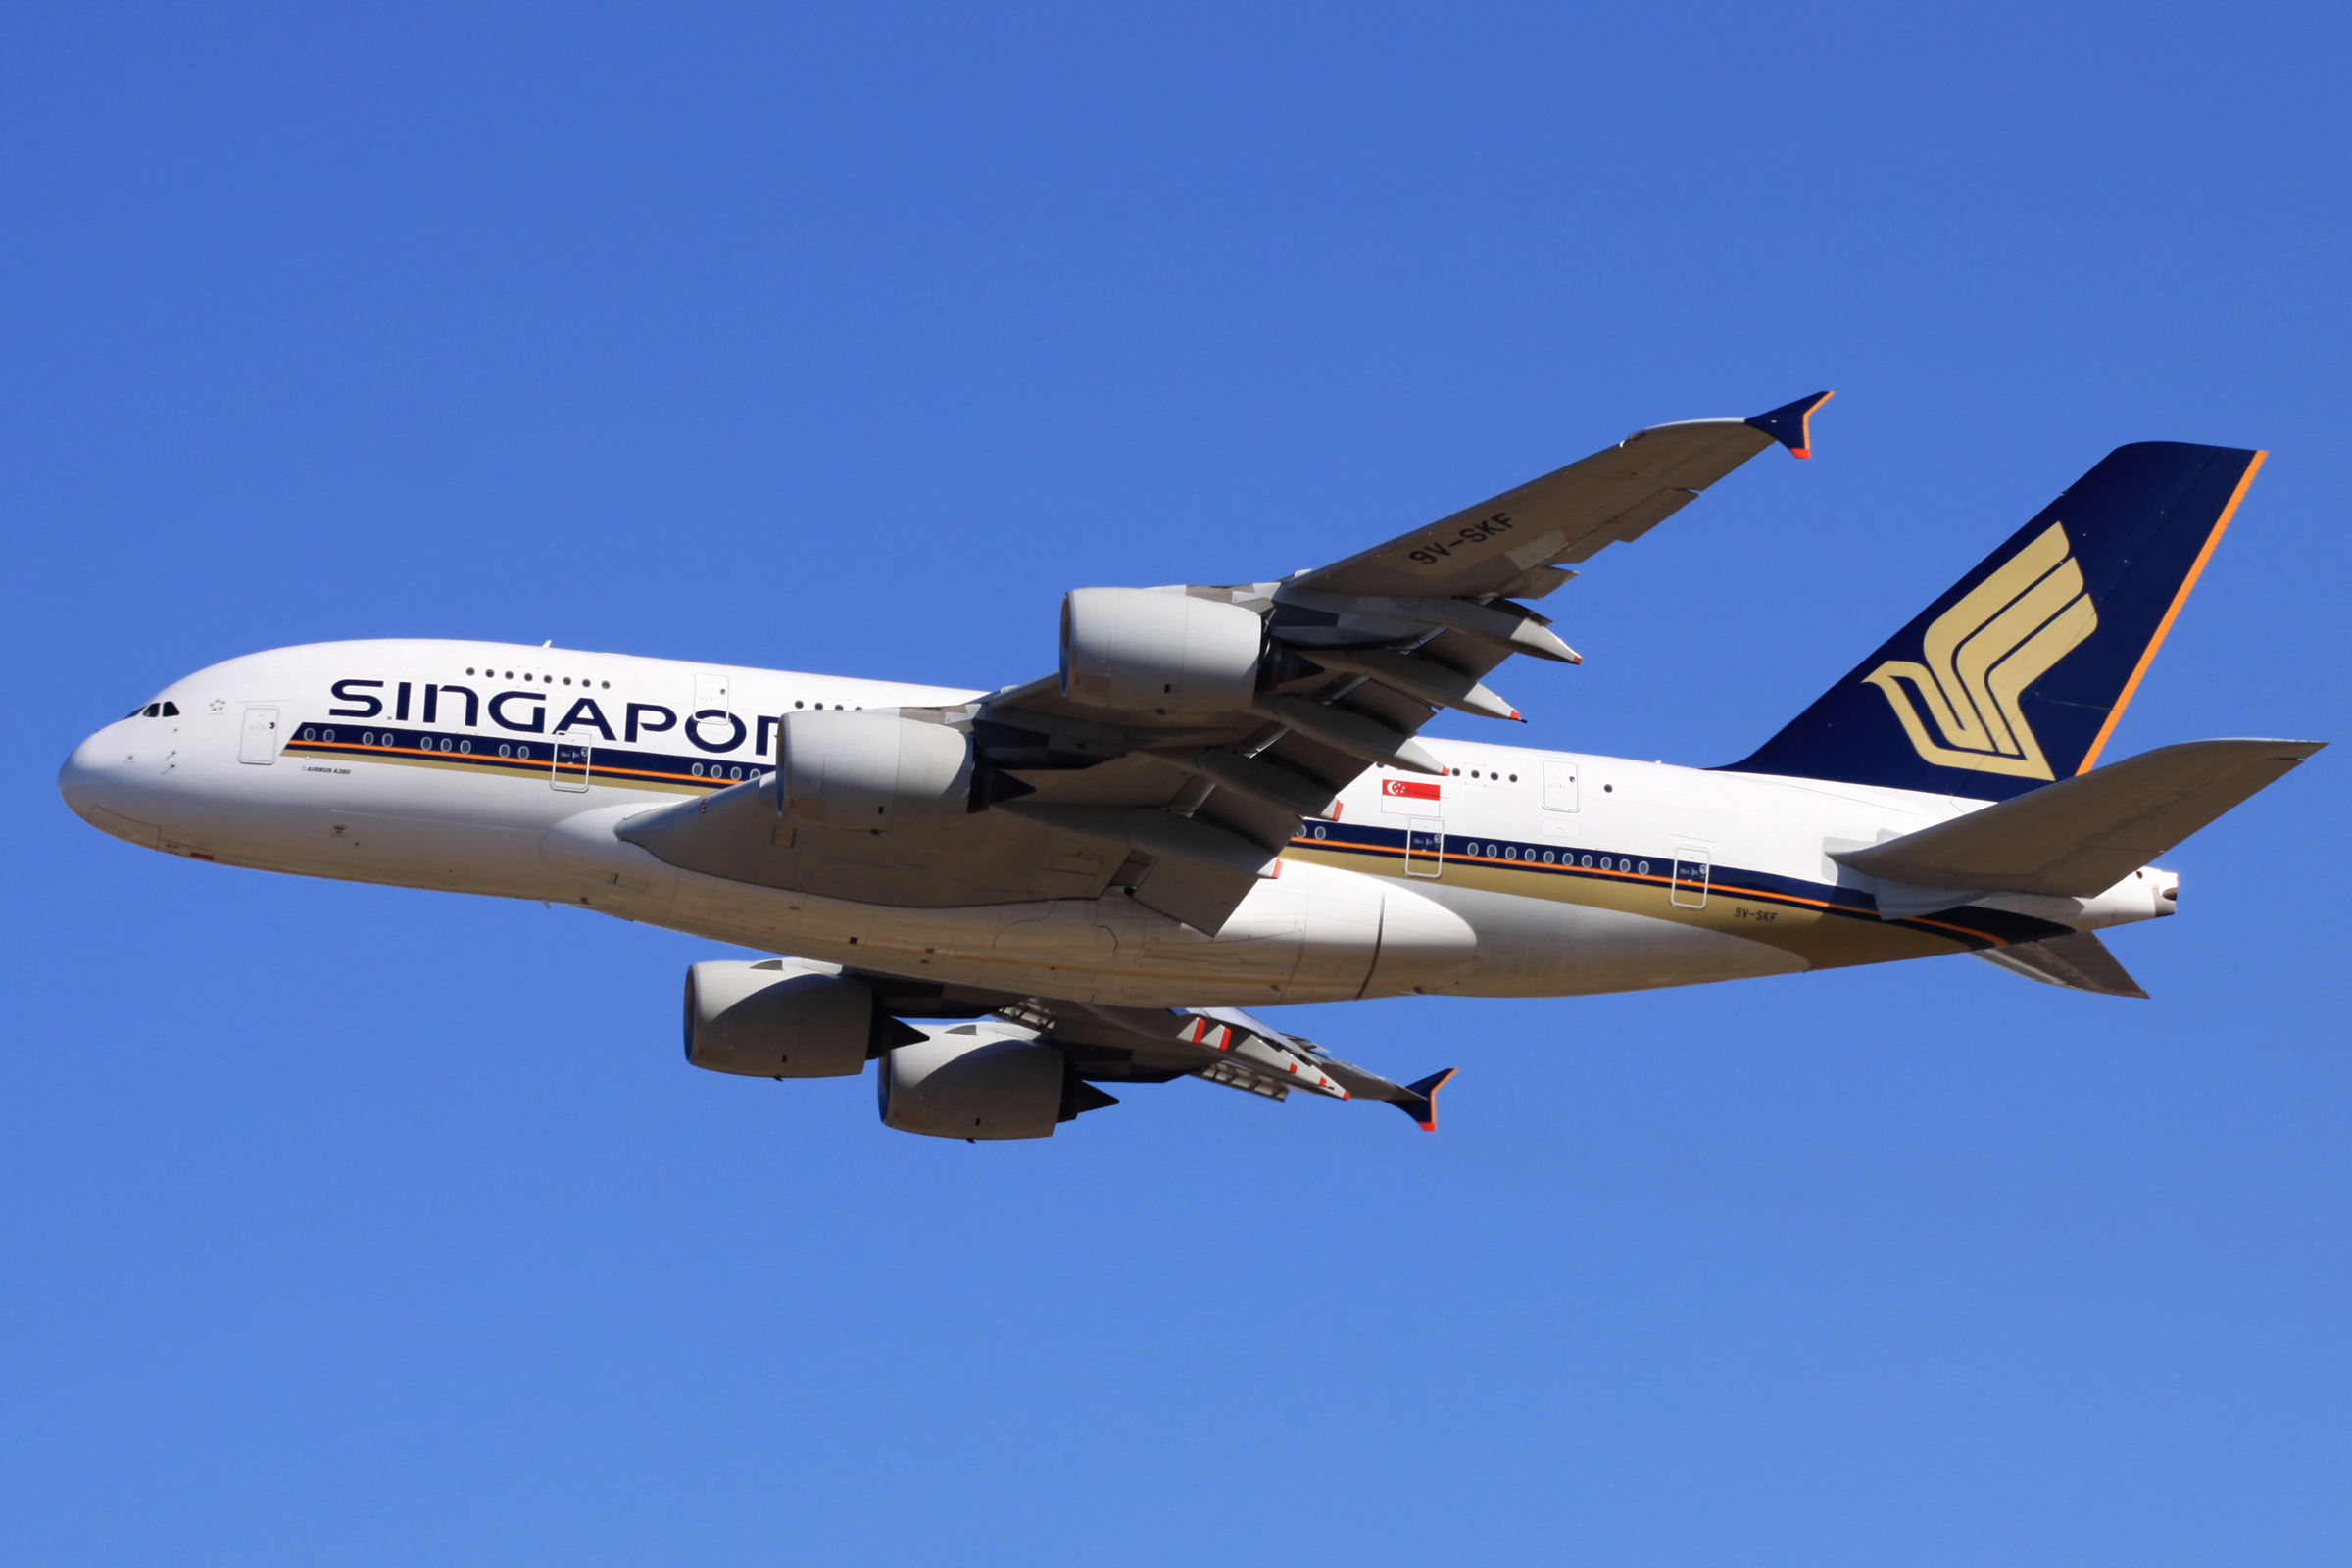 Singapore Airlines Wikipedia